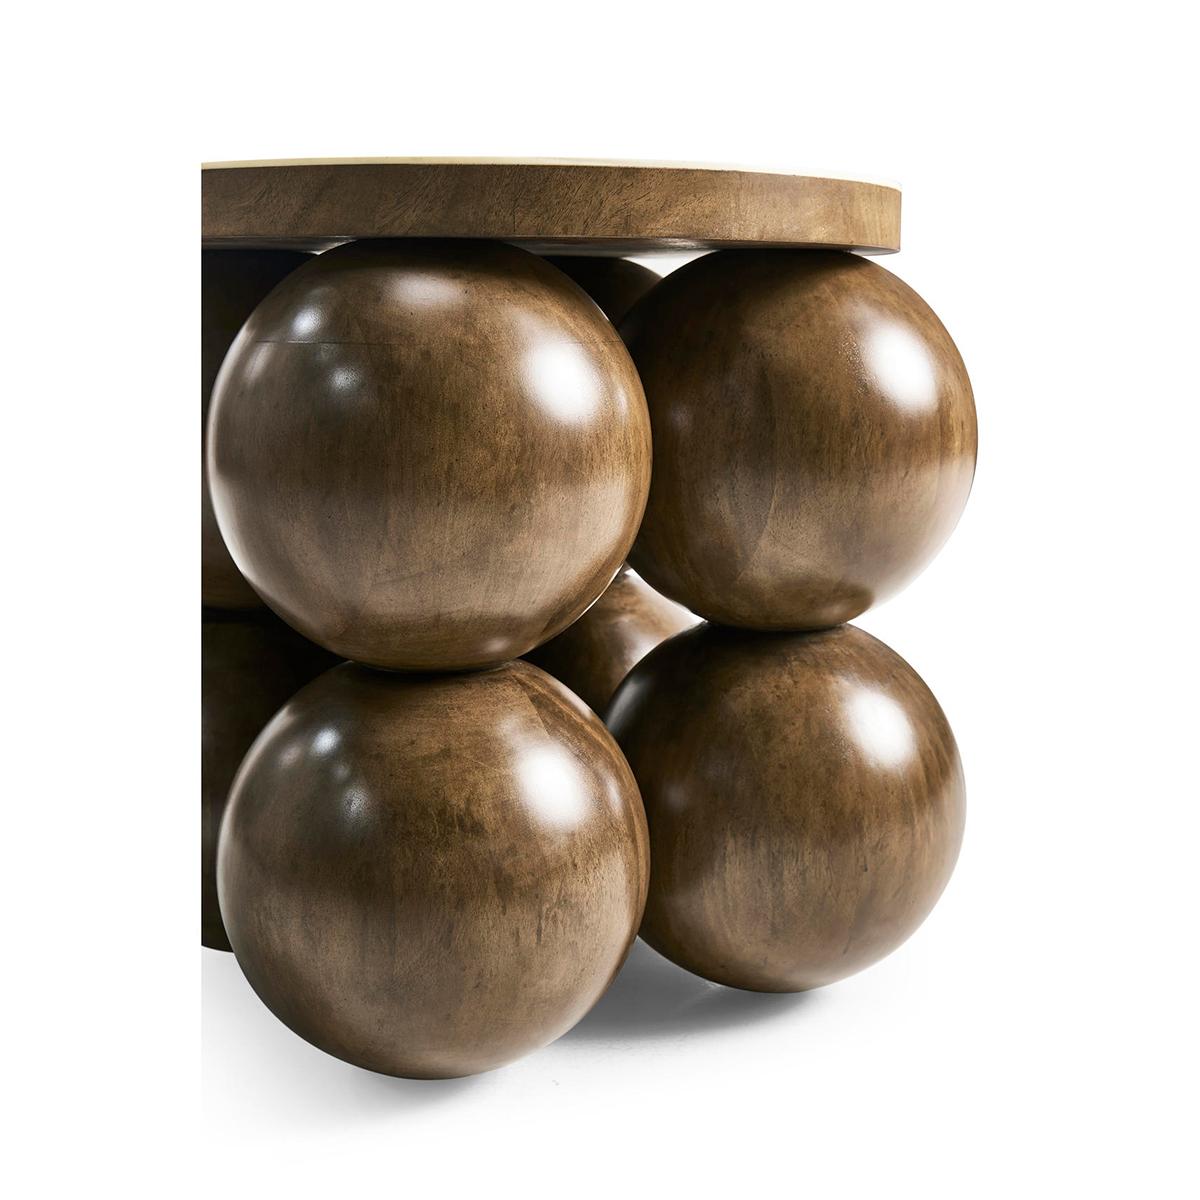 The table's solid wood-stacked orbs form a charismatic foundation that fuses art and functionality. These orbs create a unique and eye-catching design that adds personality to the piece.

The faux bone inlay banding to the round top creates a subtle